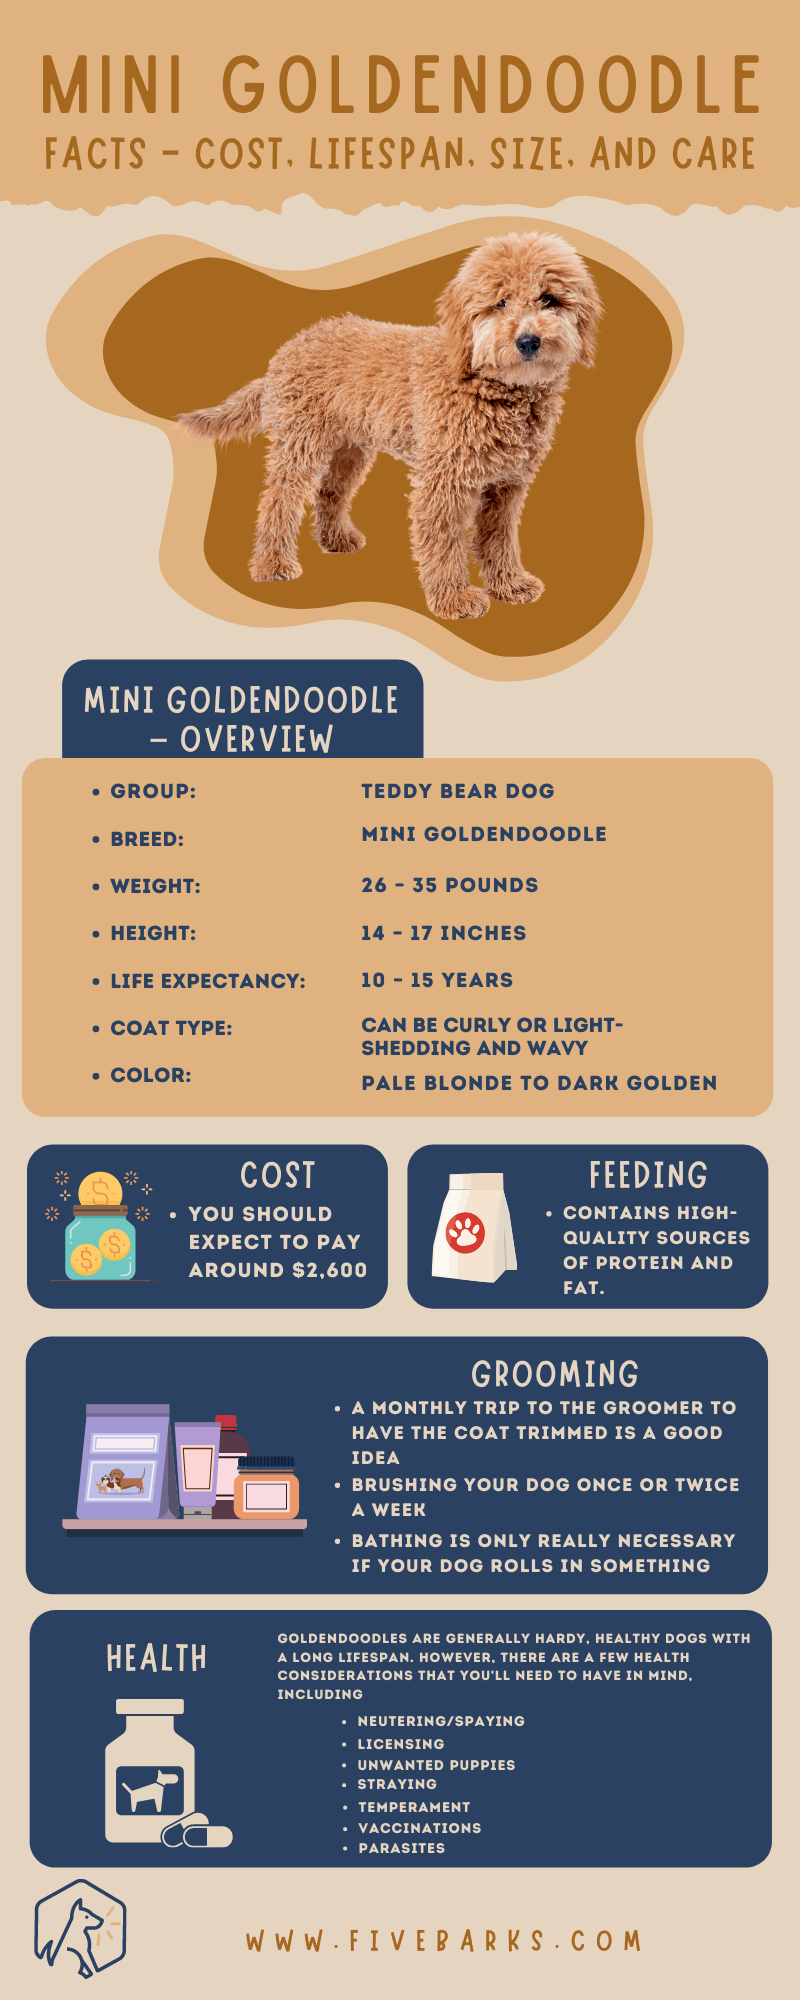 Mini Goldendoodle Facts - Cost, Lifespan, Size, and Care - Infographic